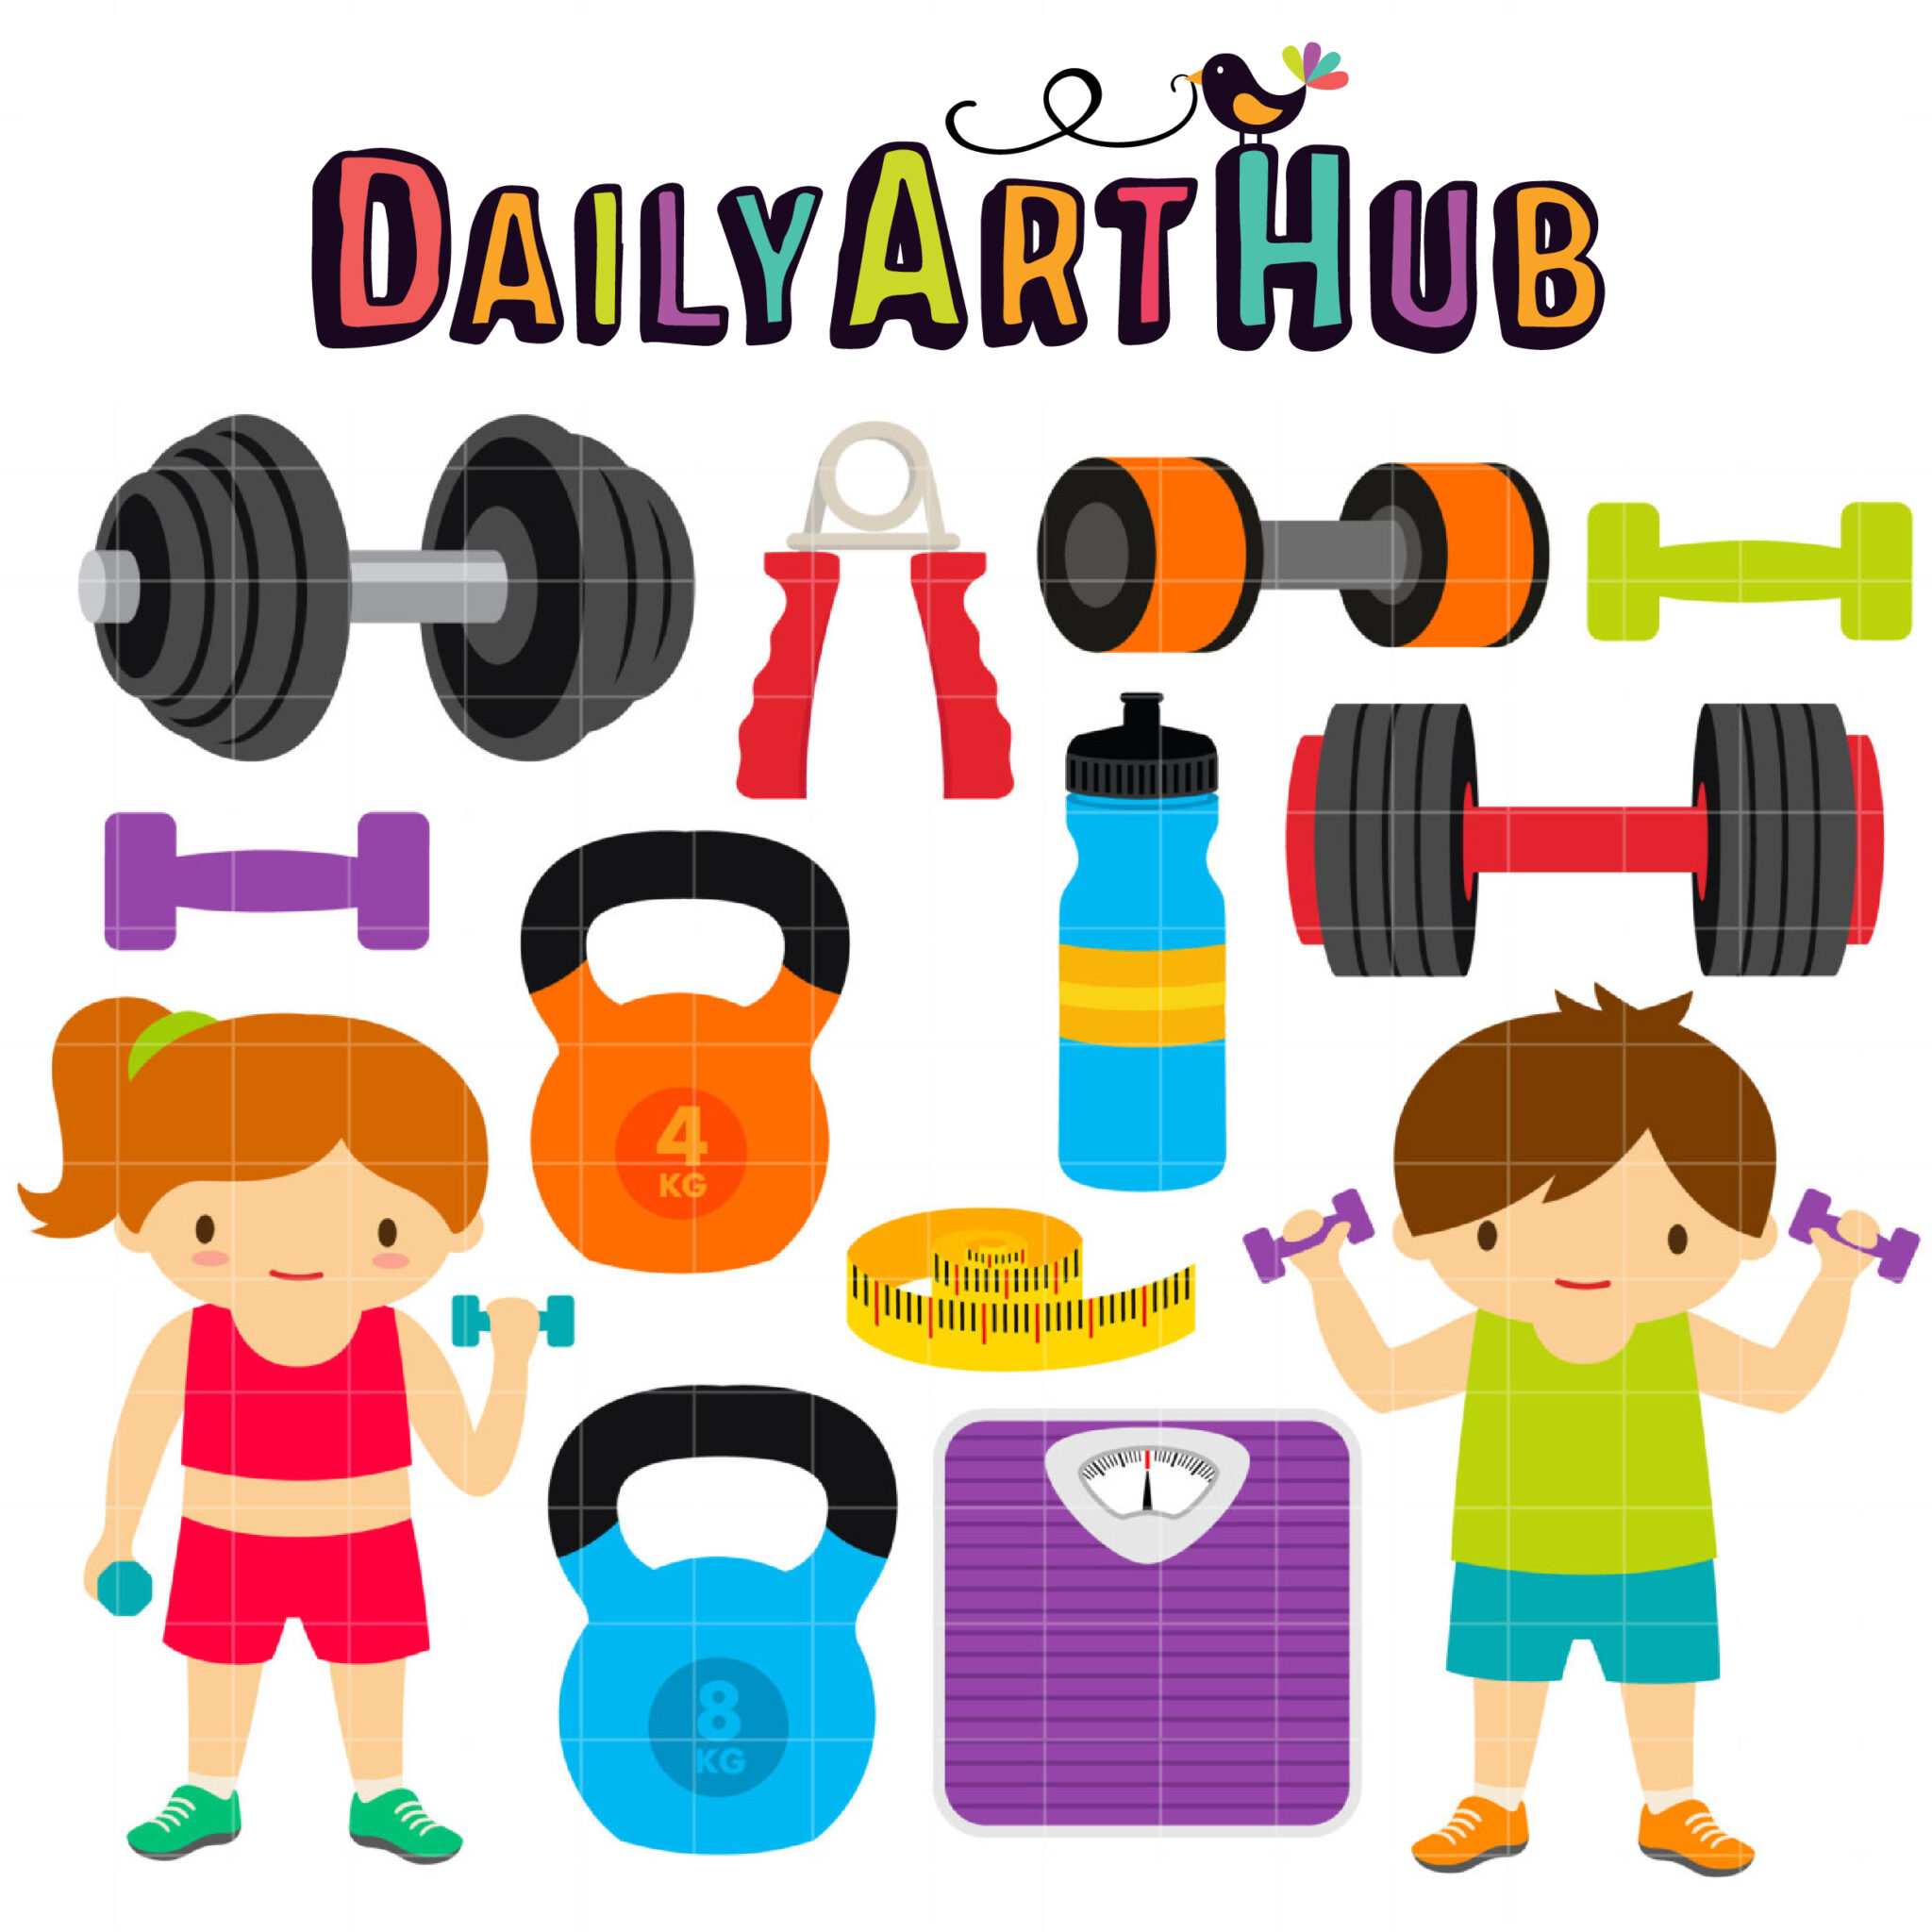 Kids Exercise Stock Vector Illustration and Royalty Free Kids Exercise  Clipart